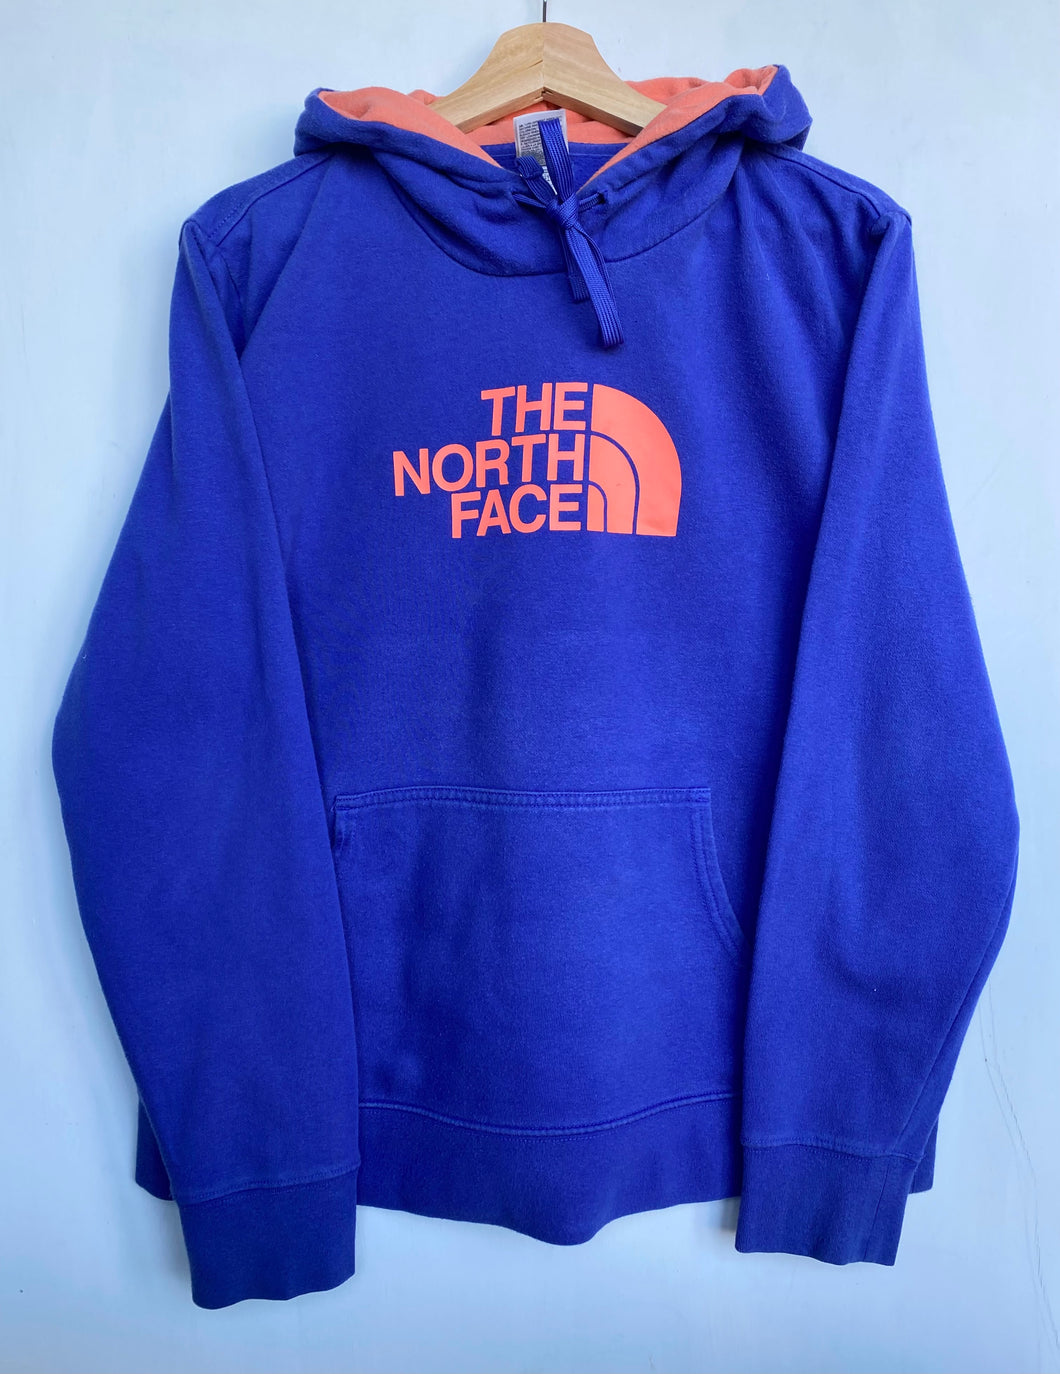 The North Face hoodie (XL)